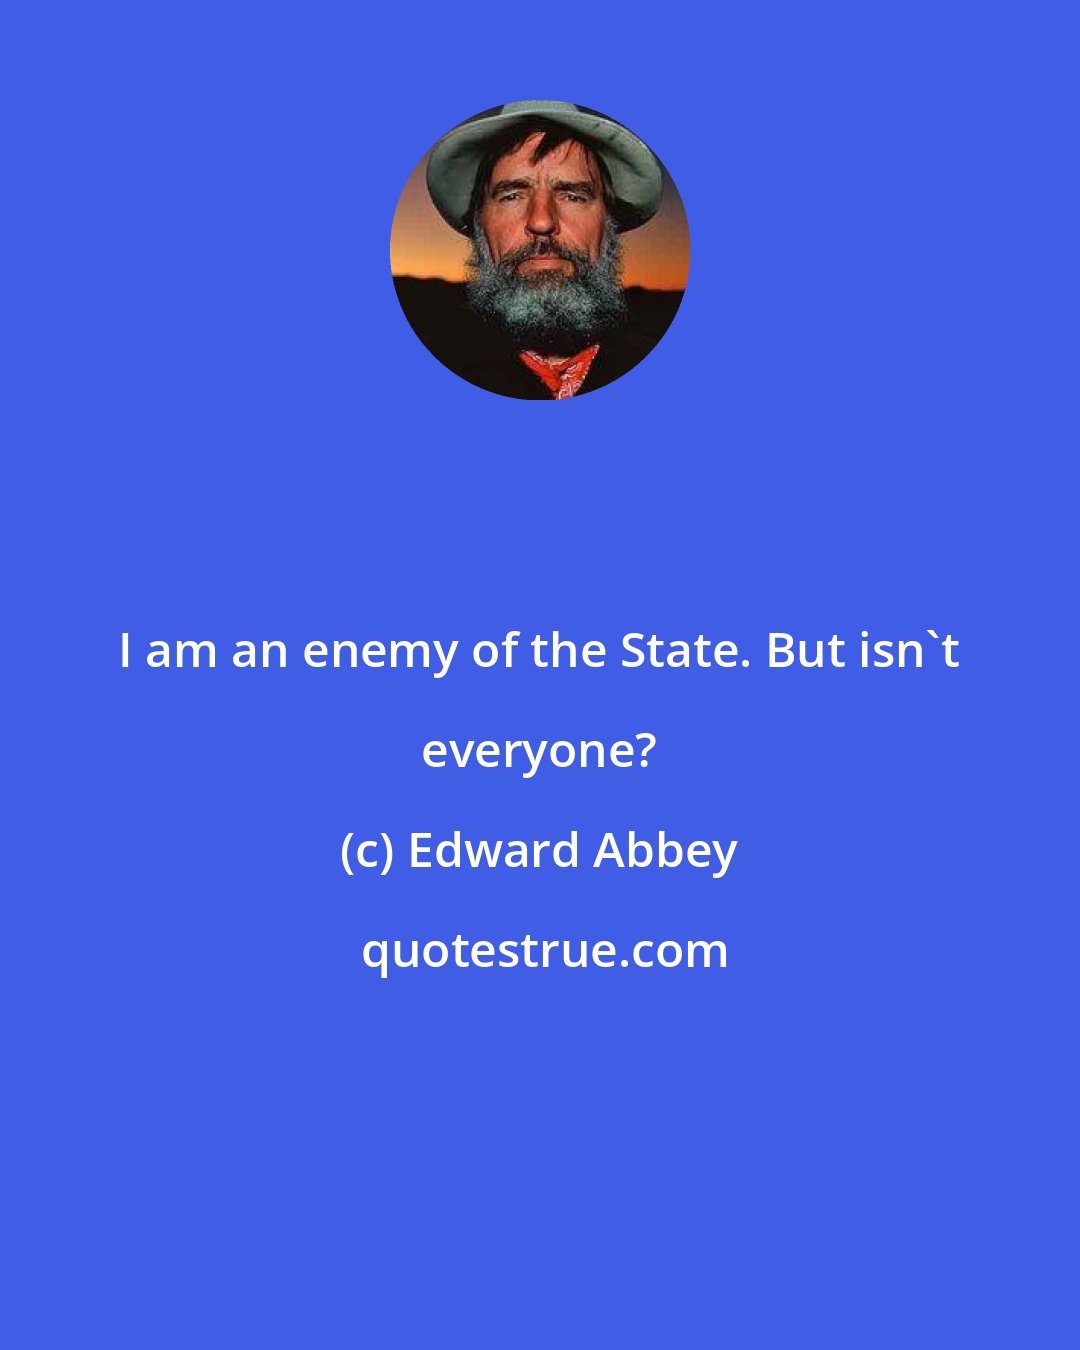 Edward Abbey: I am an enemy of the State. But isn't everyone?